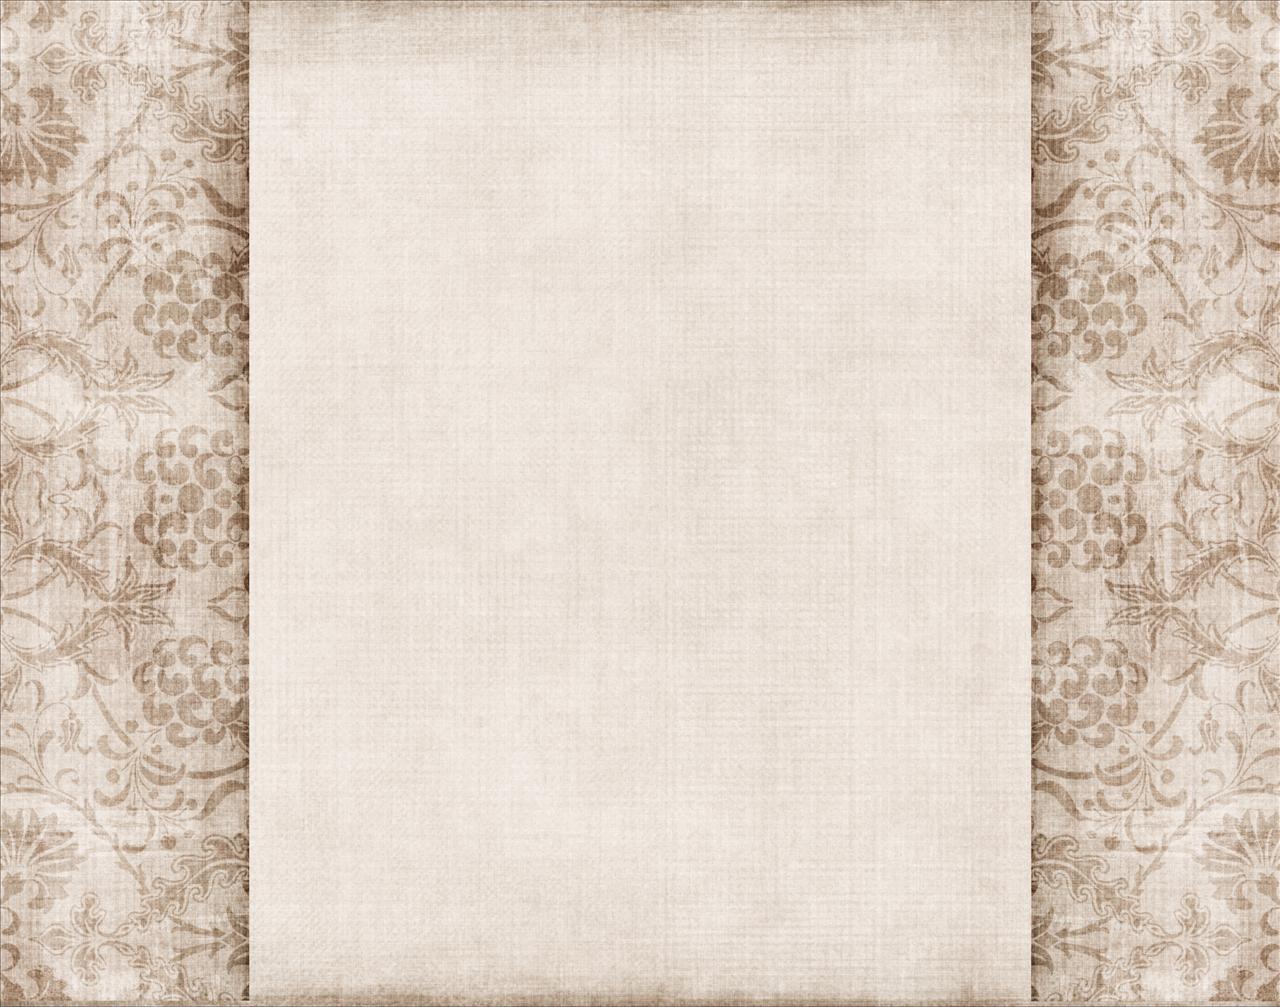 White with Flor Backgrounds